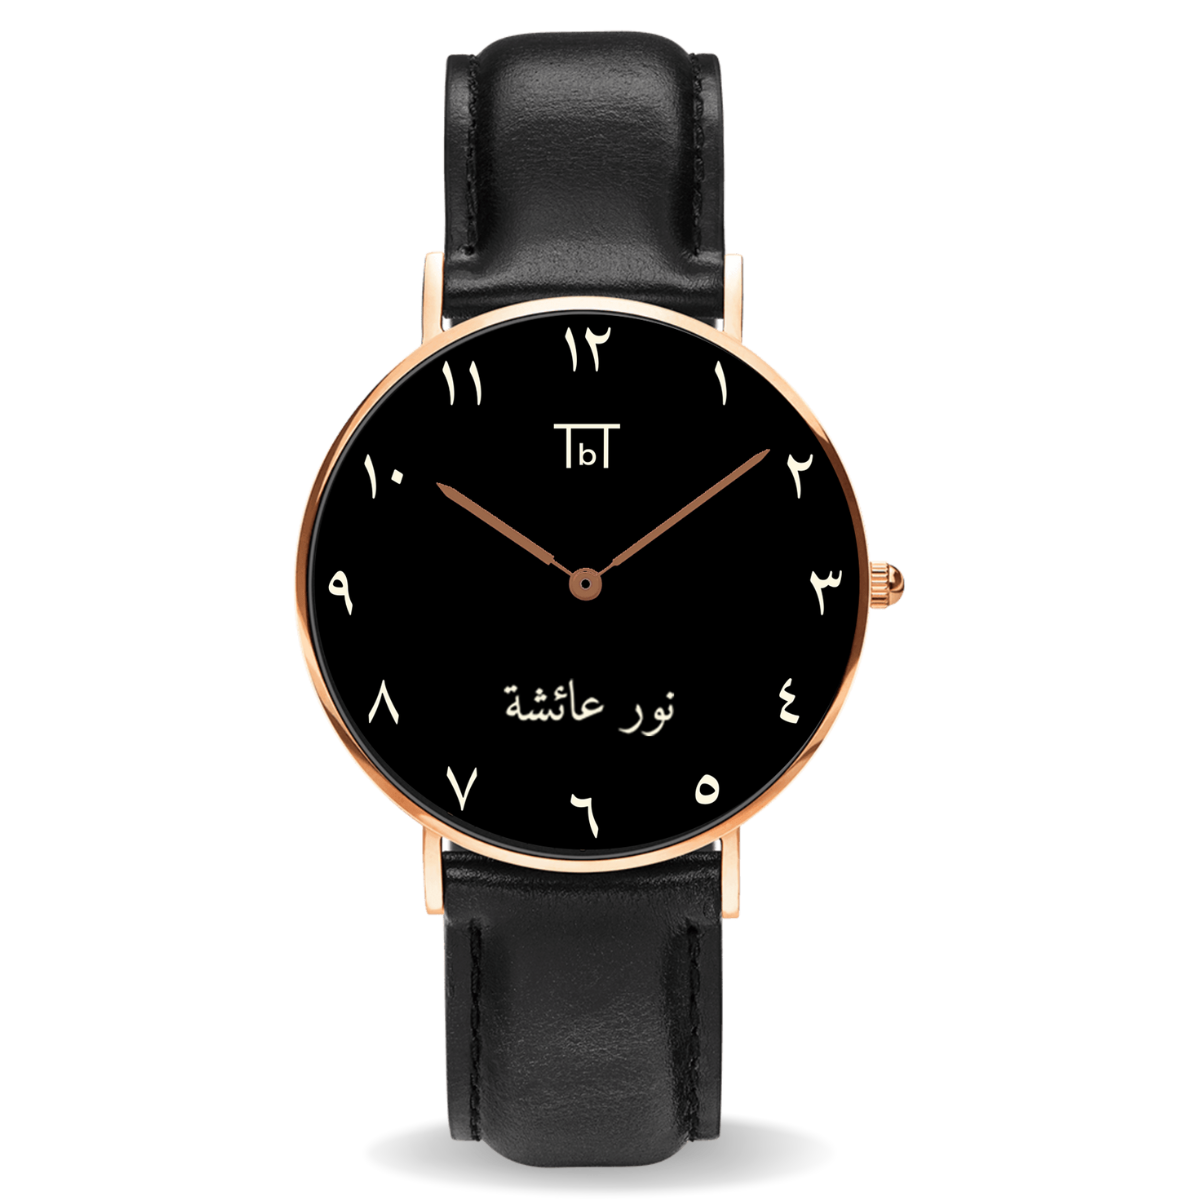 Arabic Rose Gold Black Dial with Black Leather Strap FOR HIM